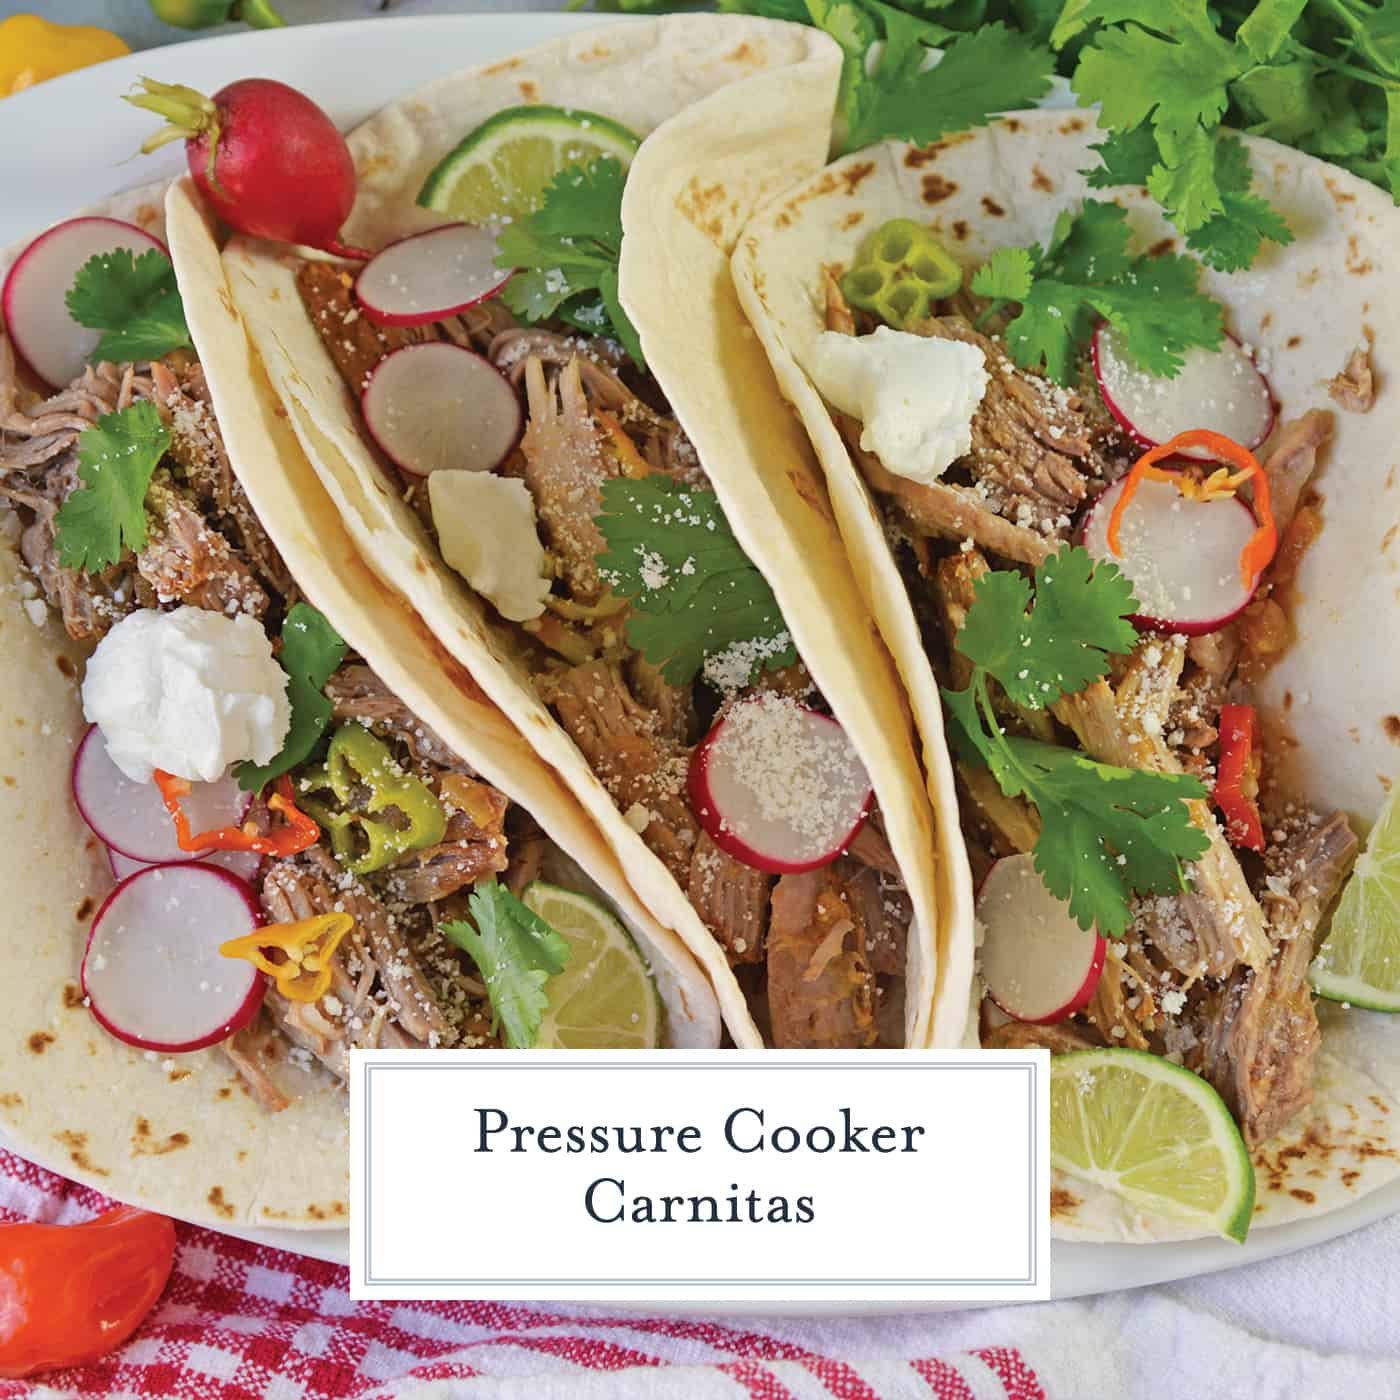 Pressure Cooker Carnitas are an easy pressure cooker recipe for shredded pork with Mexican flavors. Perfect for making the perfect soft taco! #pressurecookercarnitas #instantpotcarnitas #easycarnitas www.savoryexperiments.com